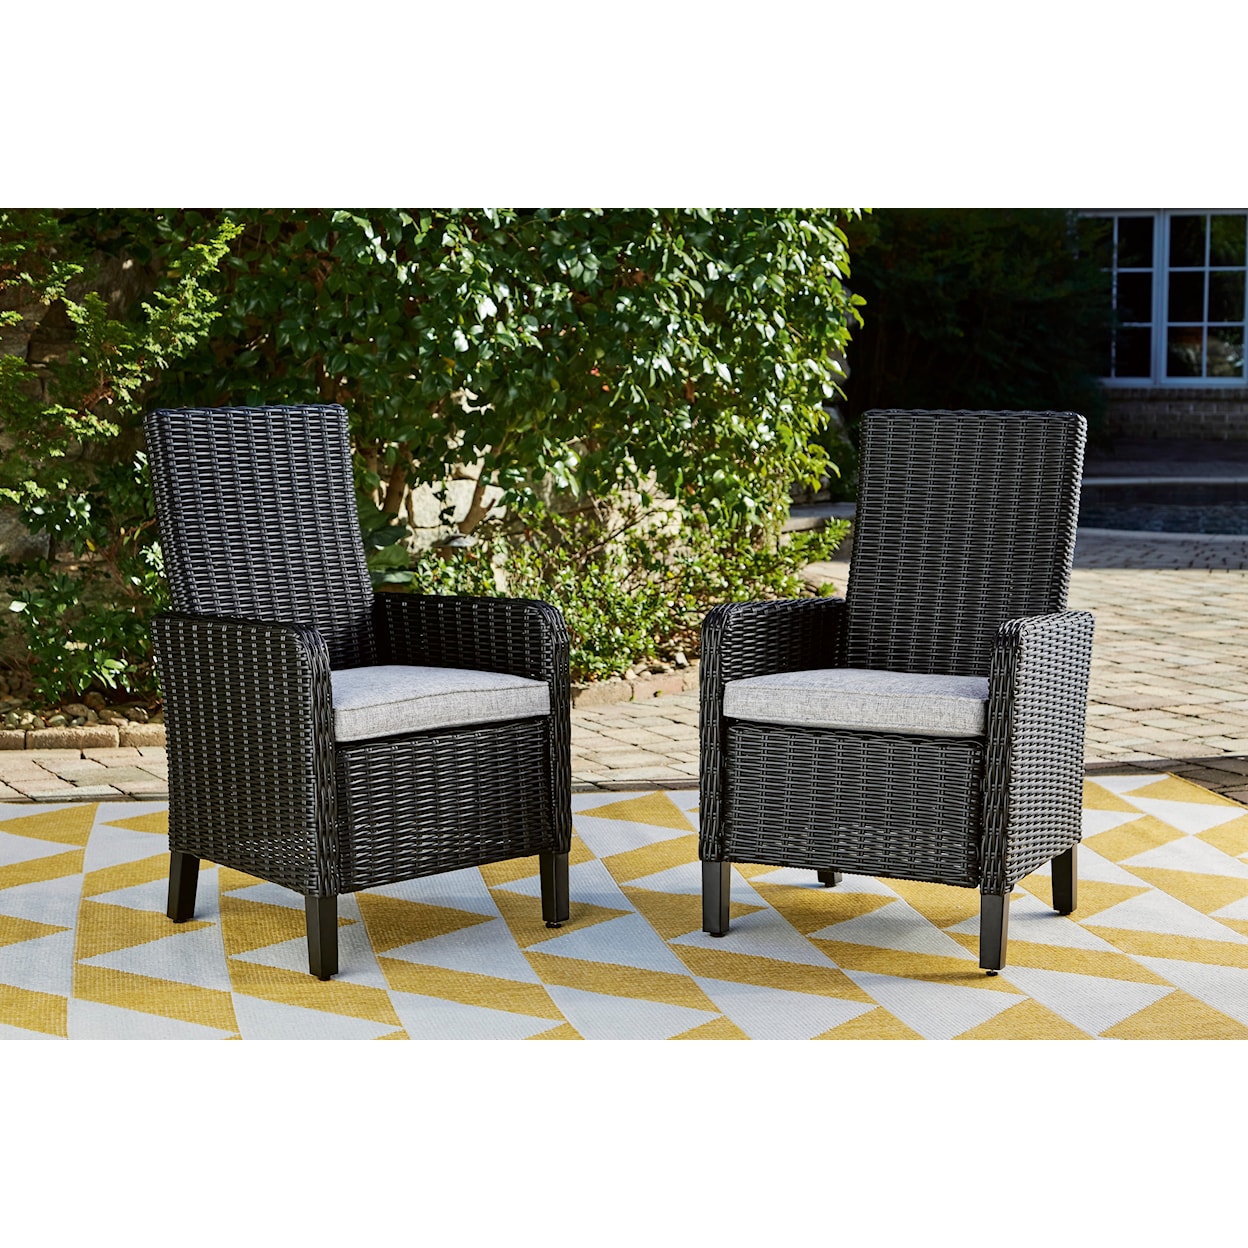 Michael Alan Select Beachcroft Set of 2 Arm Chairs with Cushion